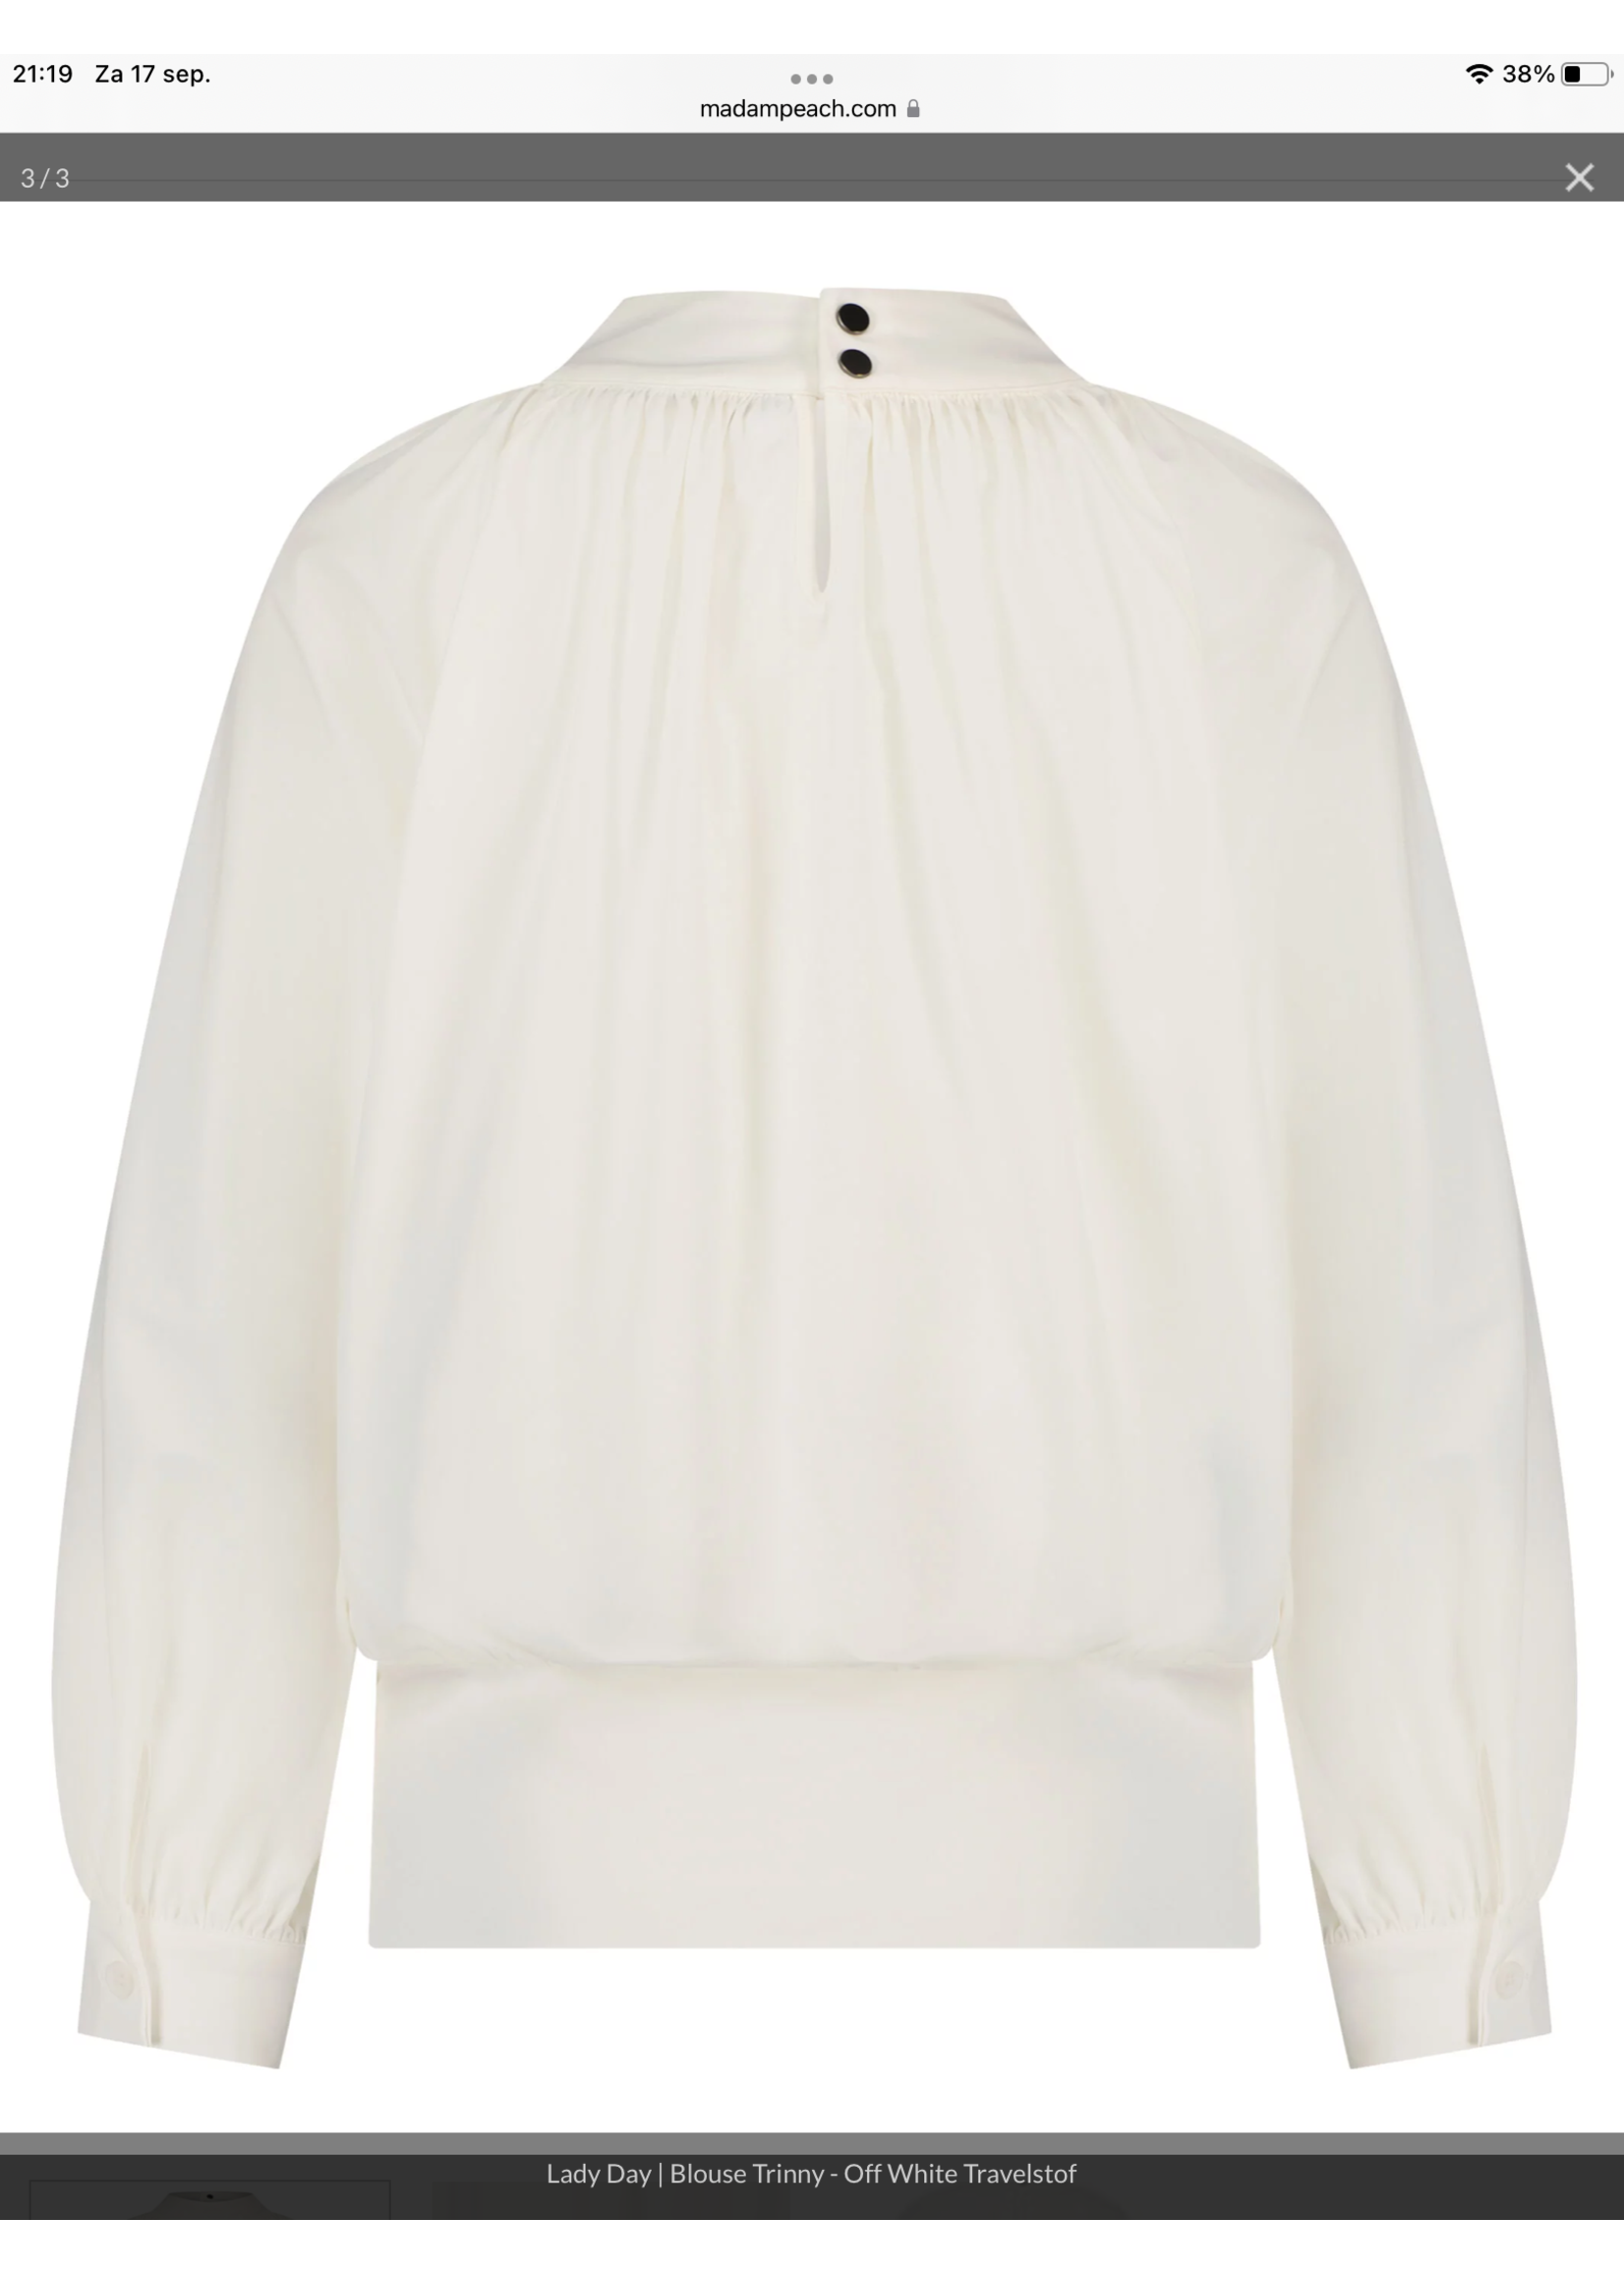 Lady Day Trinny - Top - Tobacco, Black, Off White